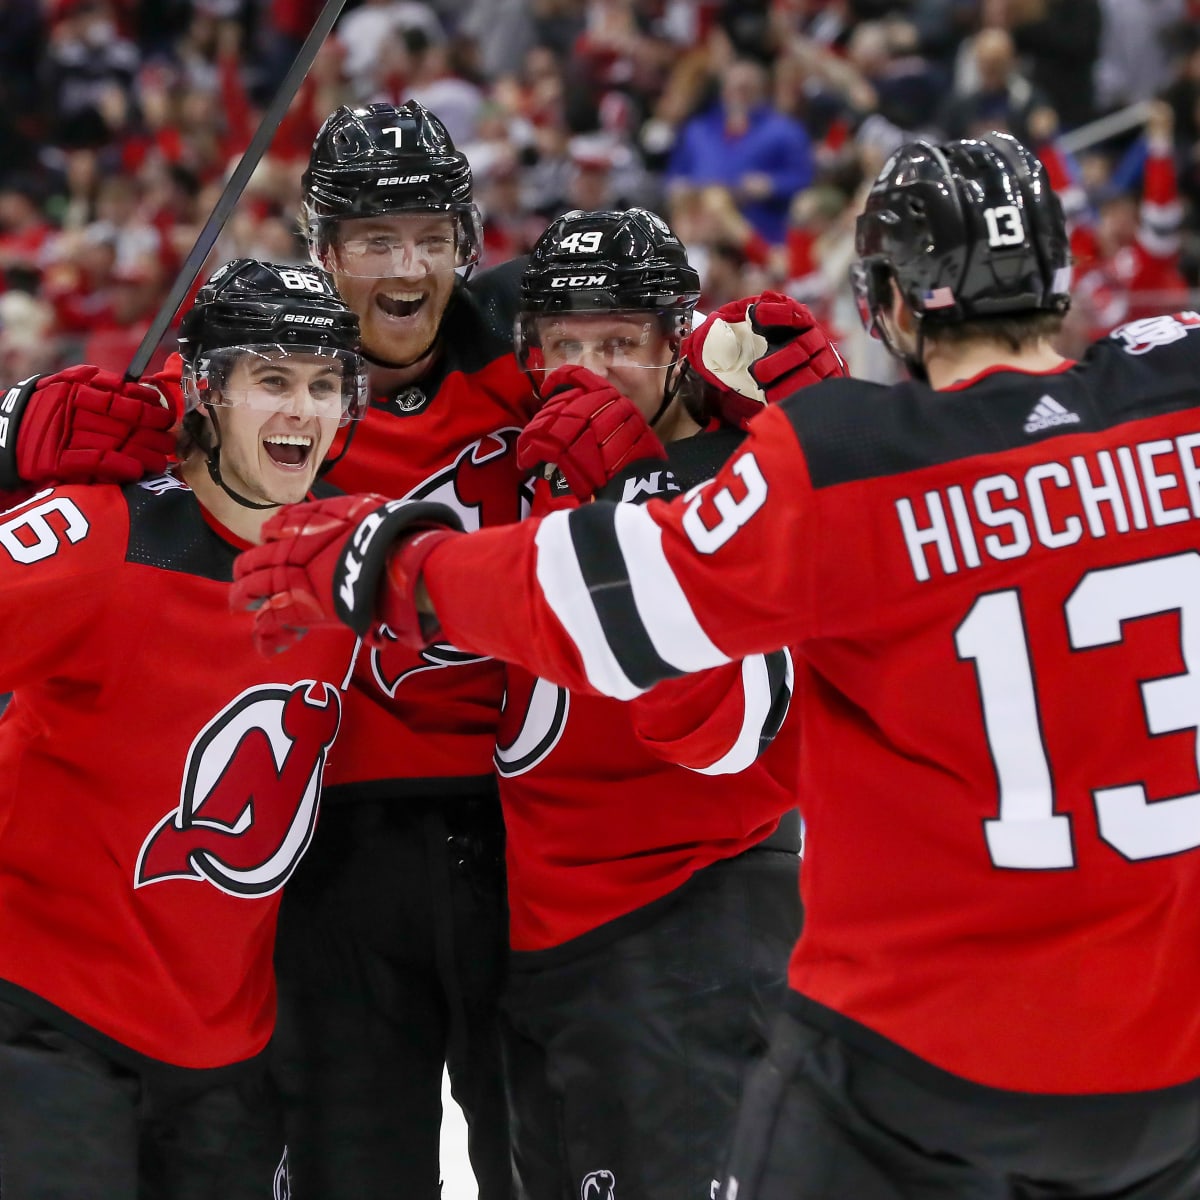 New Jersey Devils schedule: 4 games to wear the Heritage Jerseys